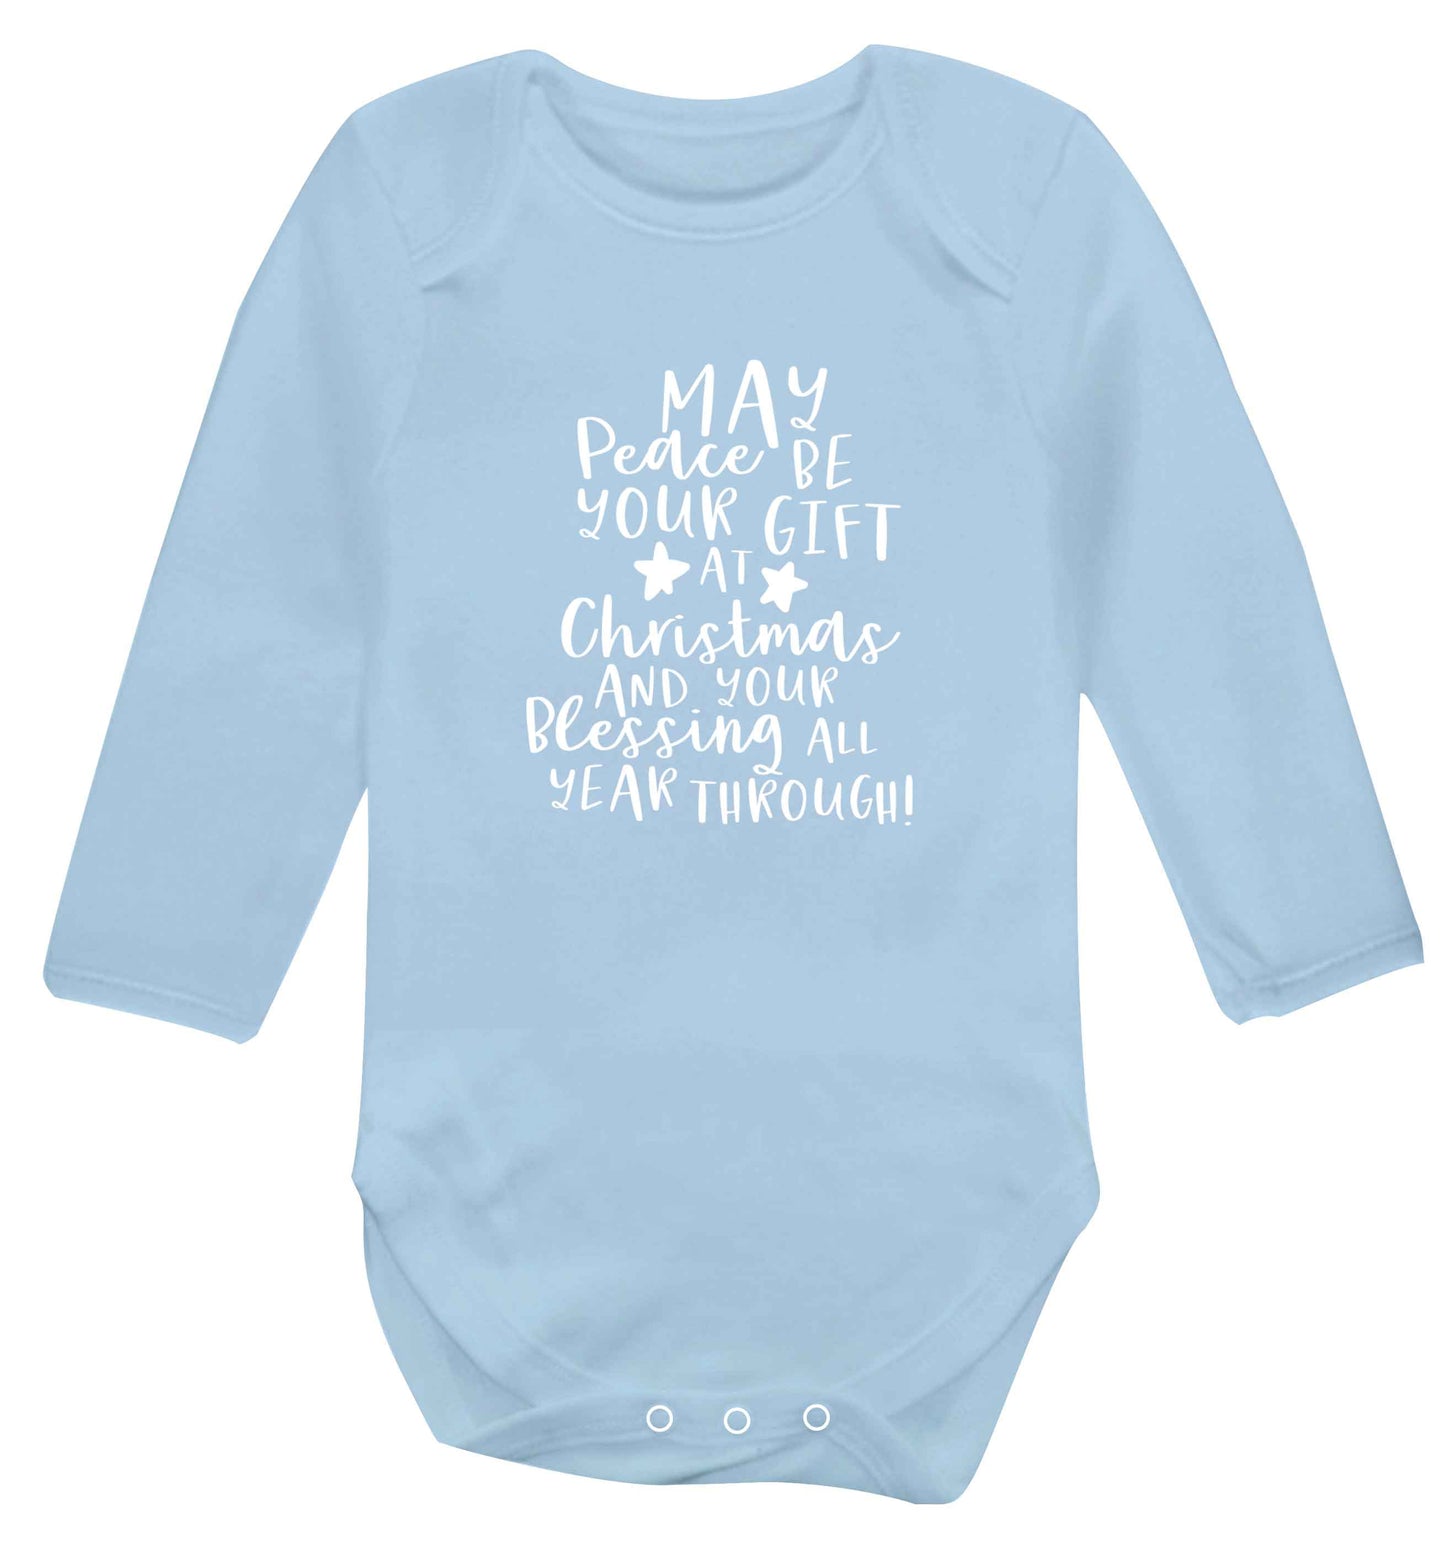 Peace be your Gift at Christmas Gift baby vest long sleeved pale blue 6-12 months